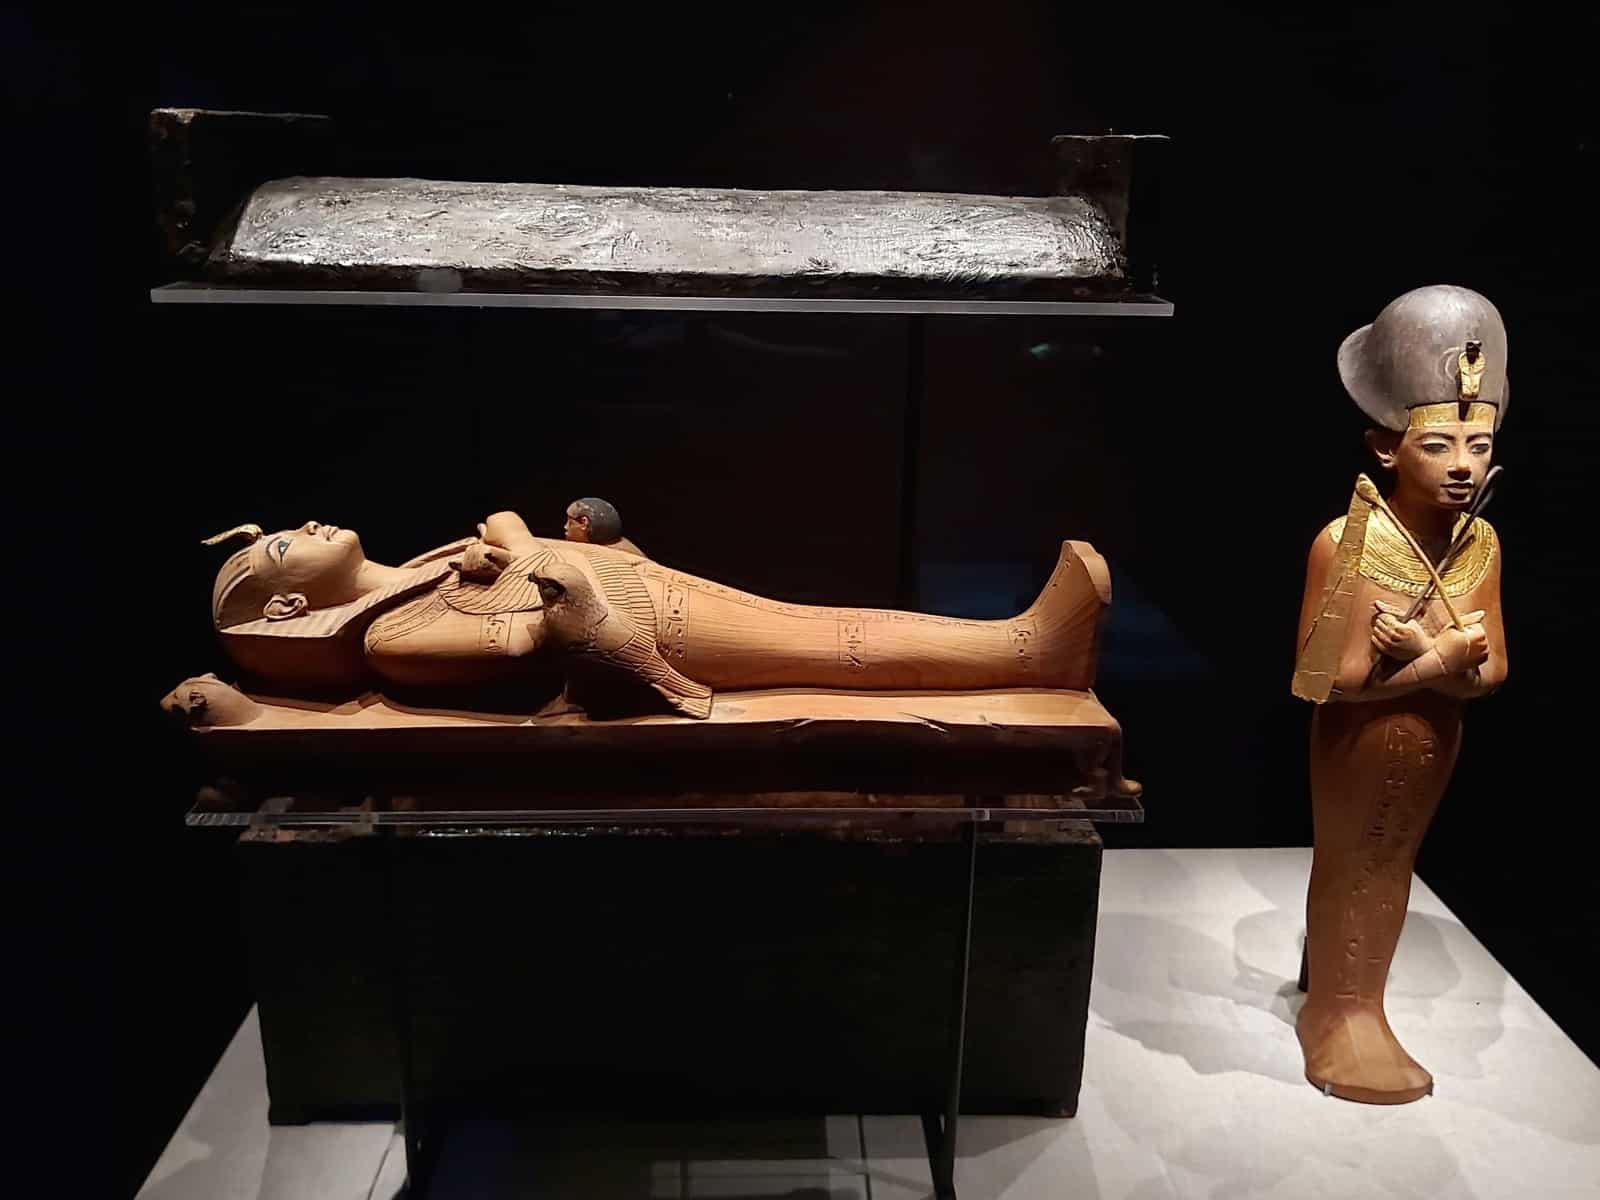 Two miniature statues. One is of Tutankhamun lying down as per the death mask. The other is standing up.